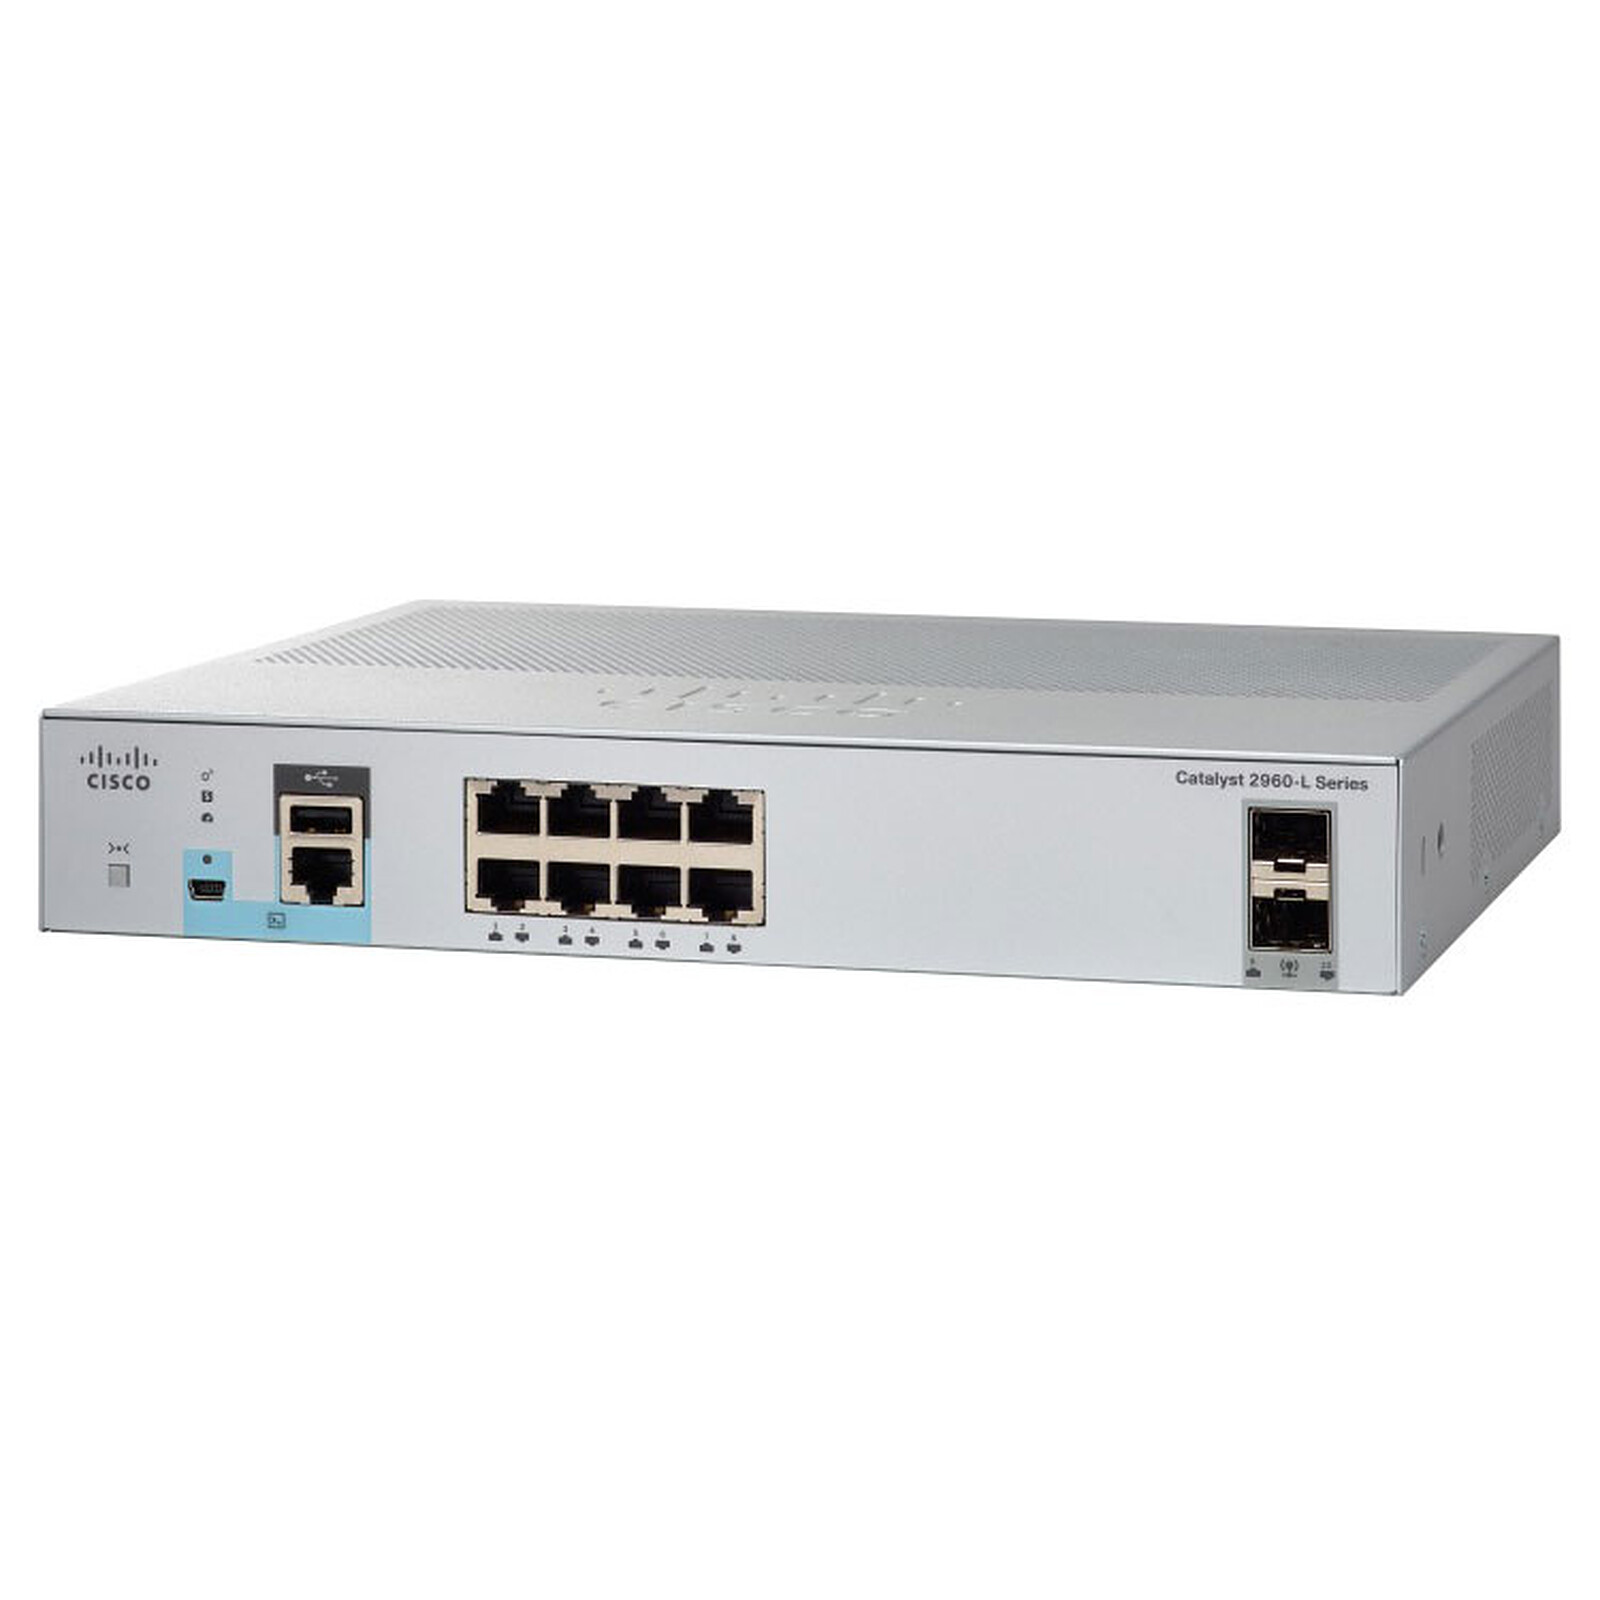 Cisco Catalyst WS-C2960L-SM-8PS - Network switch Cisco Systems on 